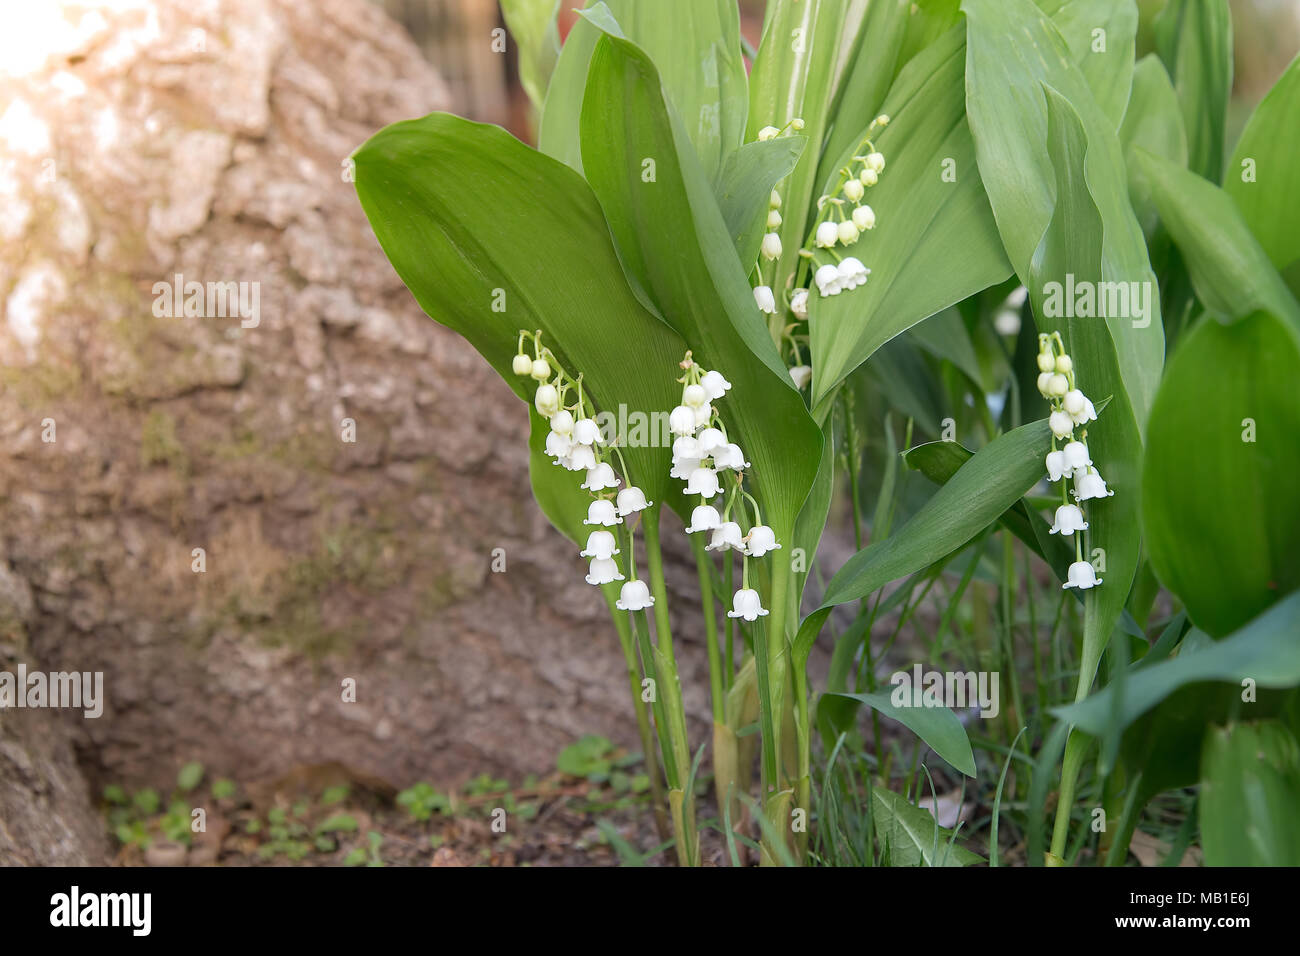 White Bell Shaped Flowers High Resolution Stock Photography and Images -  Alamy